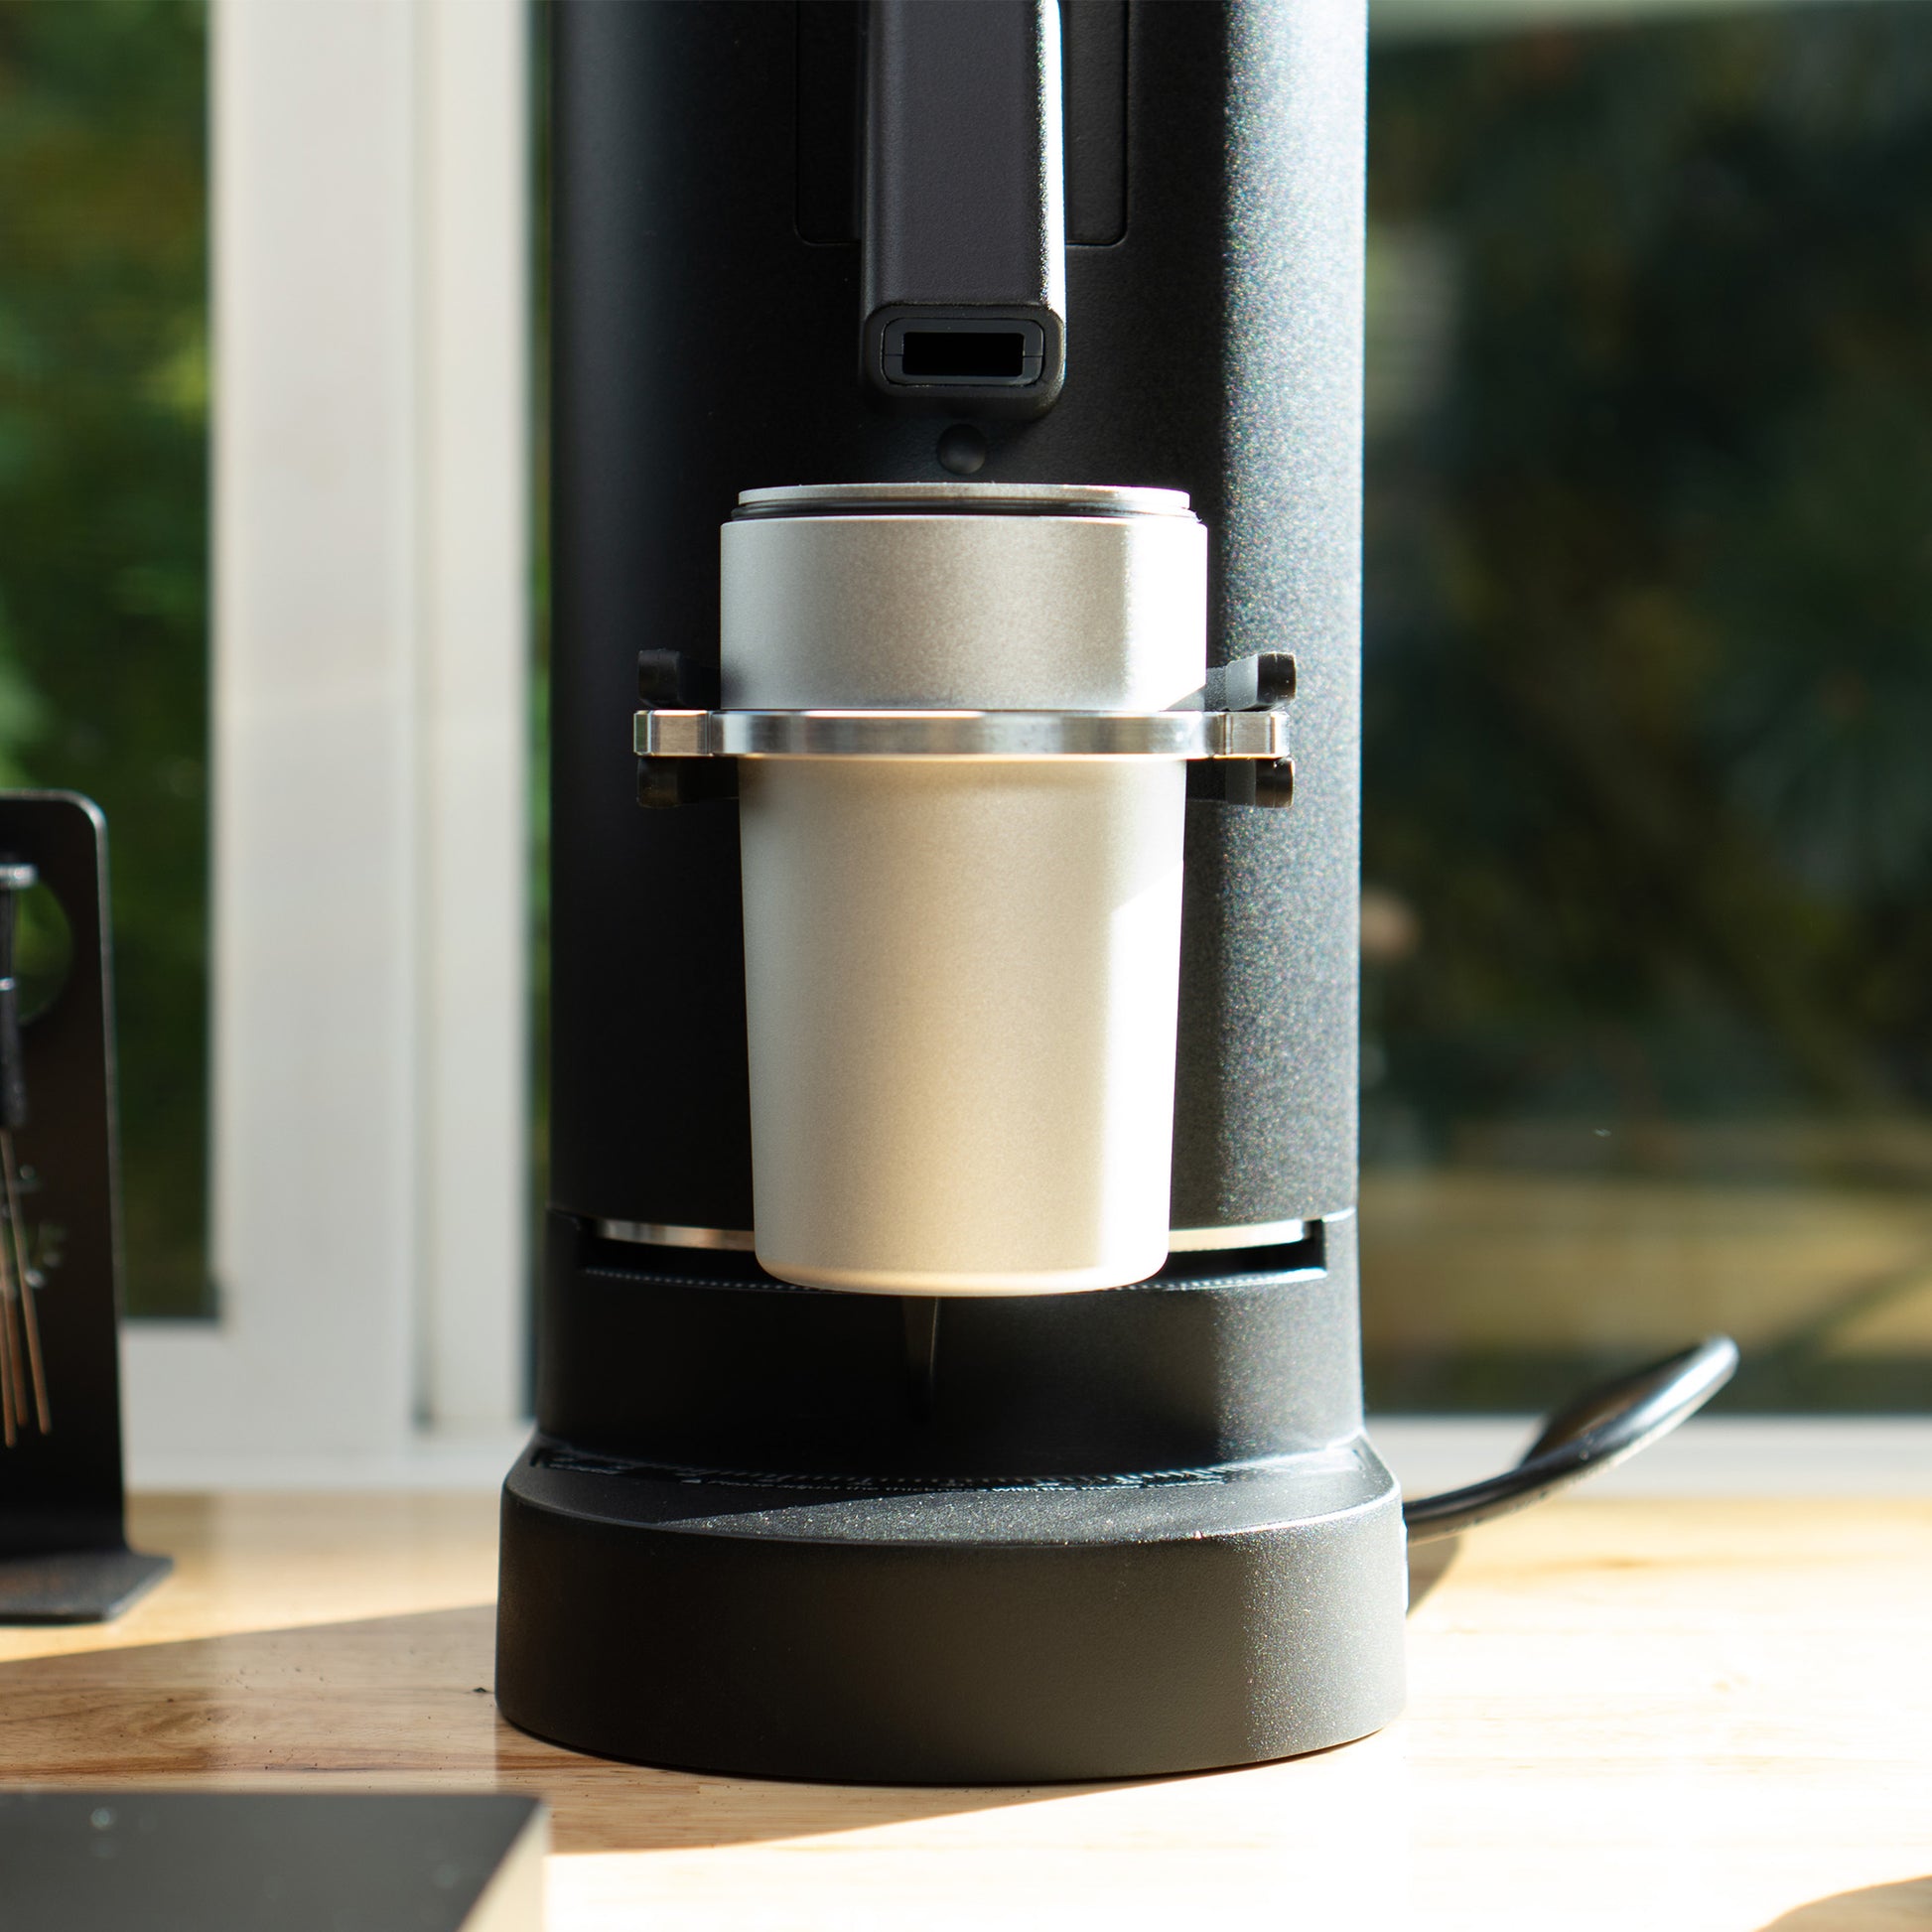 The Wilfa Uniform+ Plus Coffee Grinder with Integrated Scales – You Barista